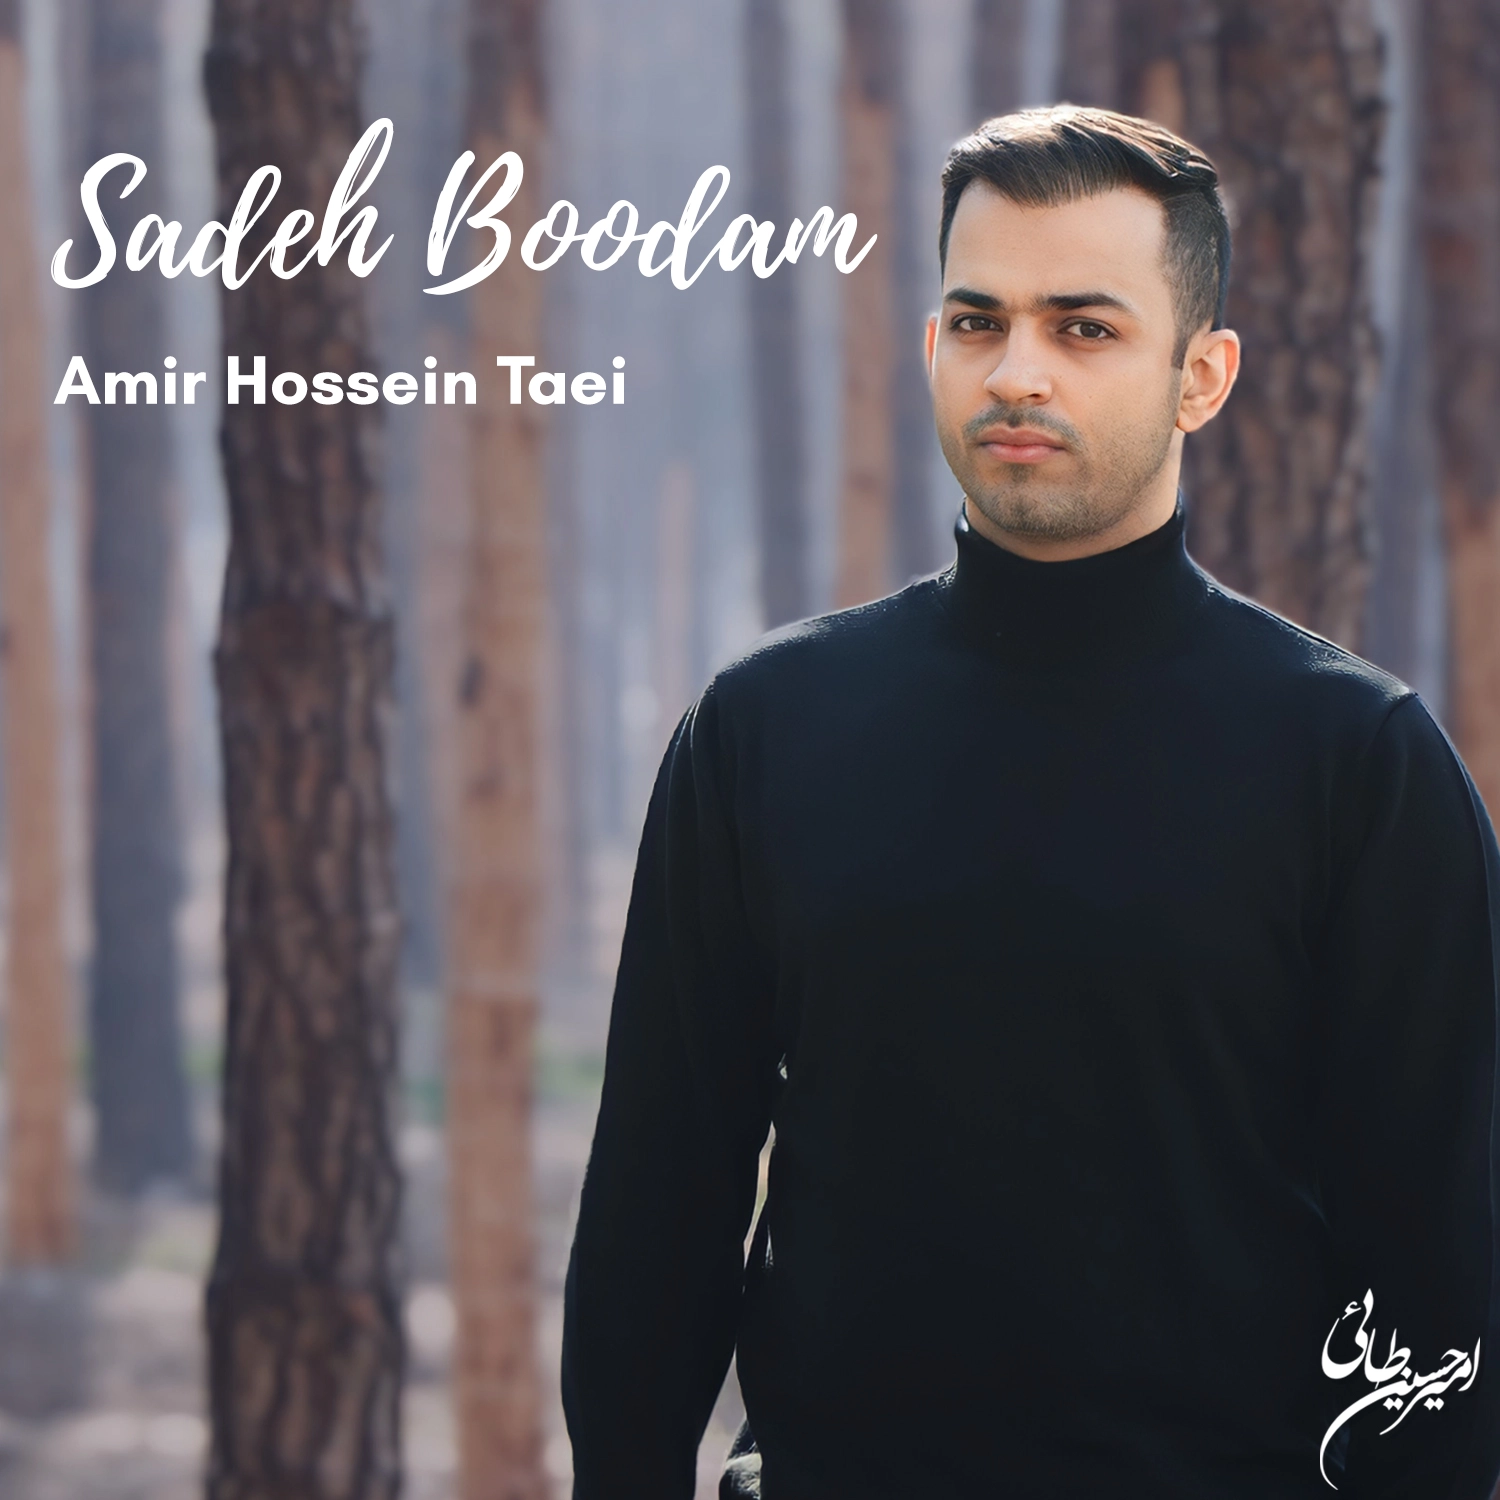 The “Sadeh Boodam” Single has been released, 25th December 2023